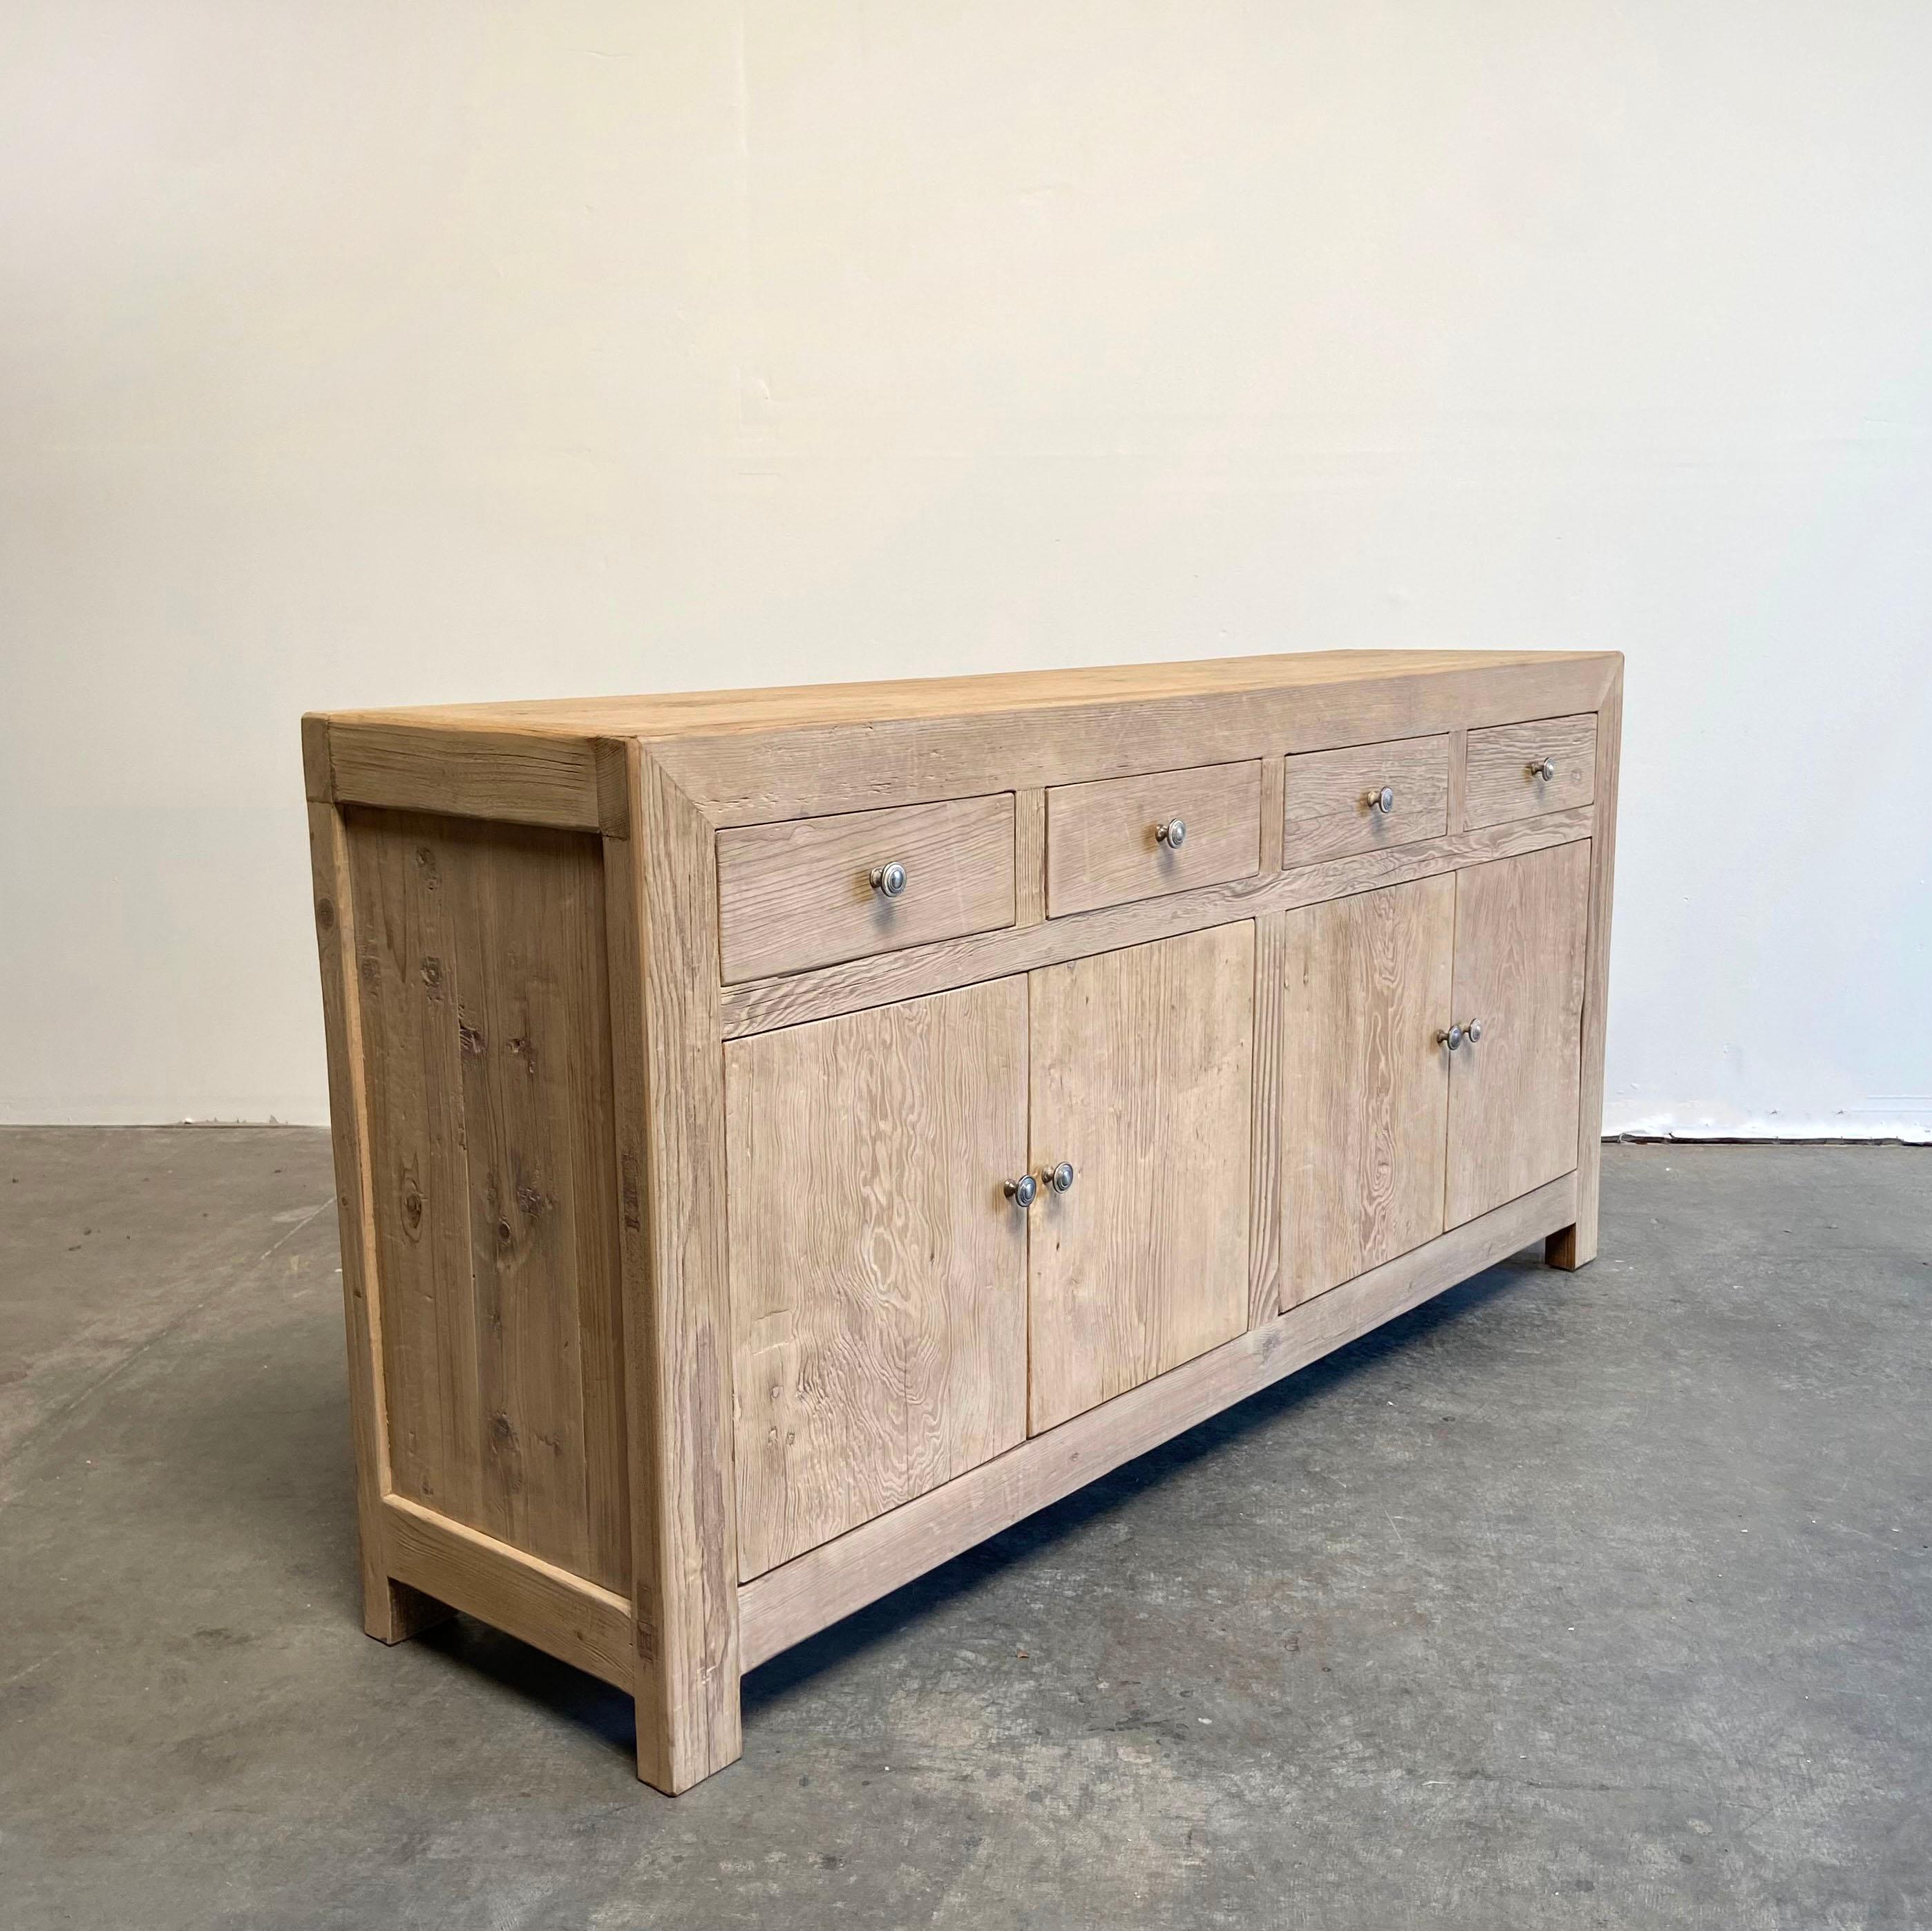 Reclaimed pine cabinet with drawers and doors
Natural bleach reclaimed pine with patina. Cabinet with 4 working drawers and doors.
Doors are removable to use as open shelving if you wanted.
Doors and drawers open with ease. Top has a natural